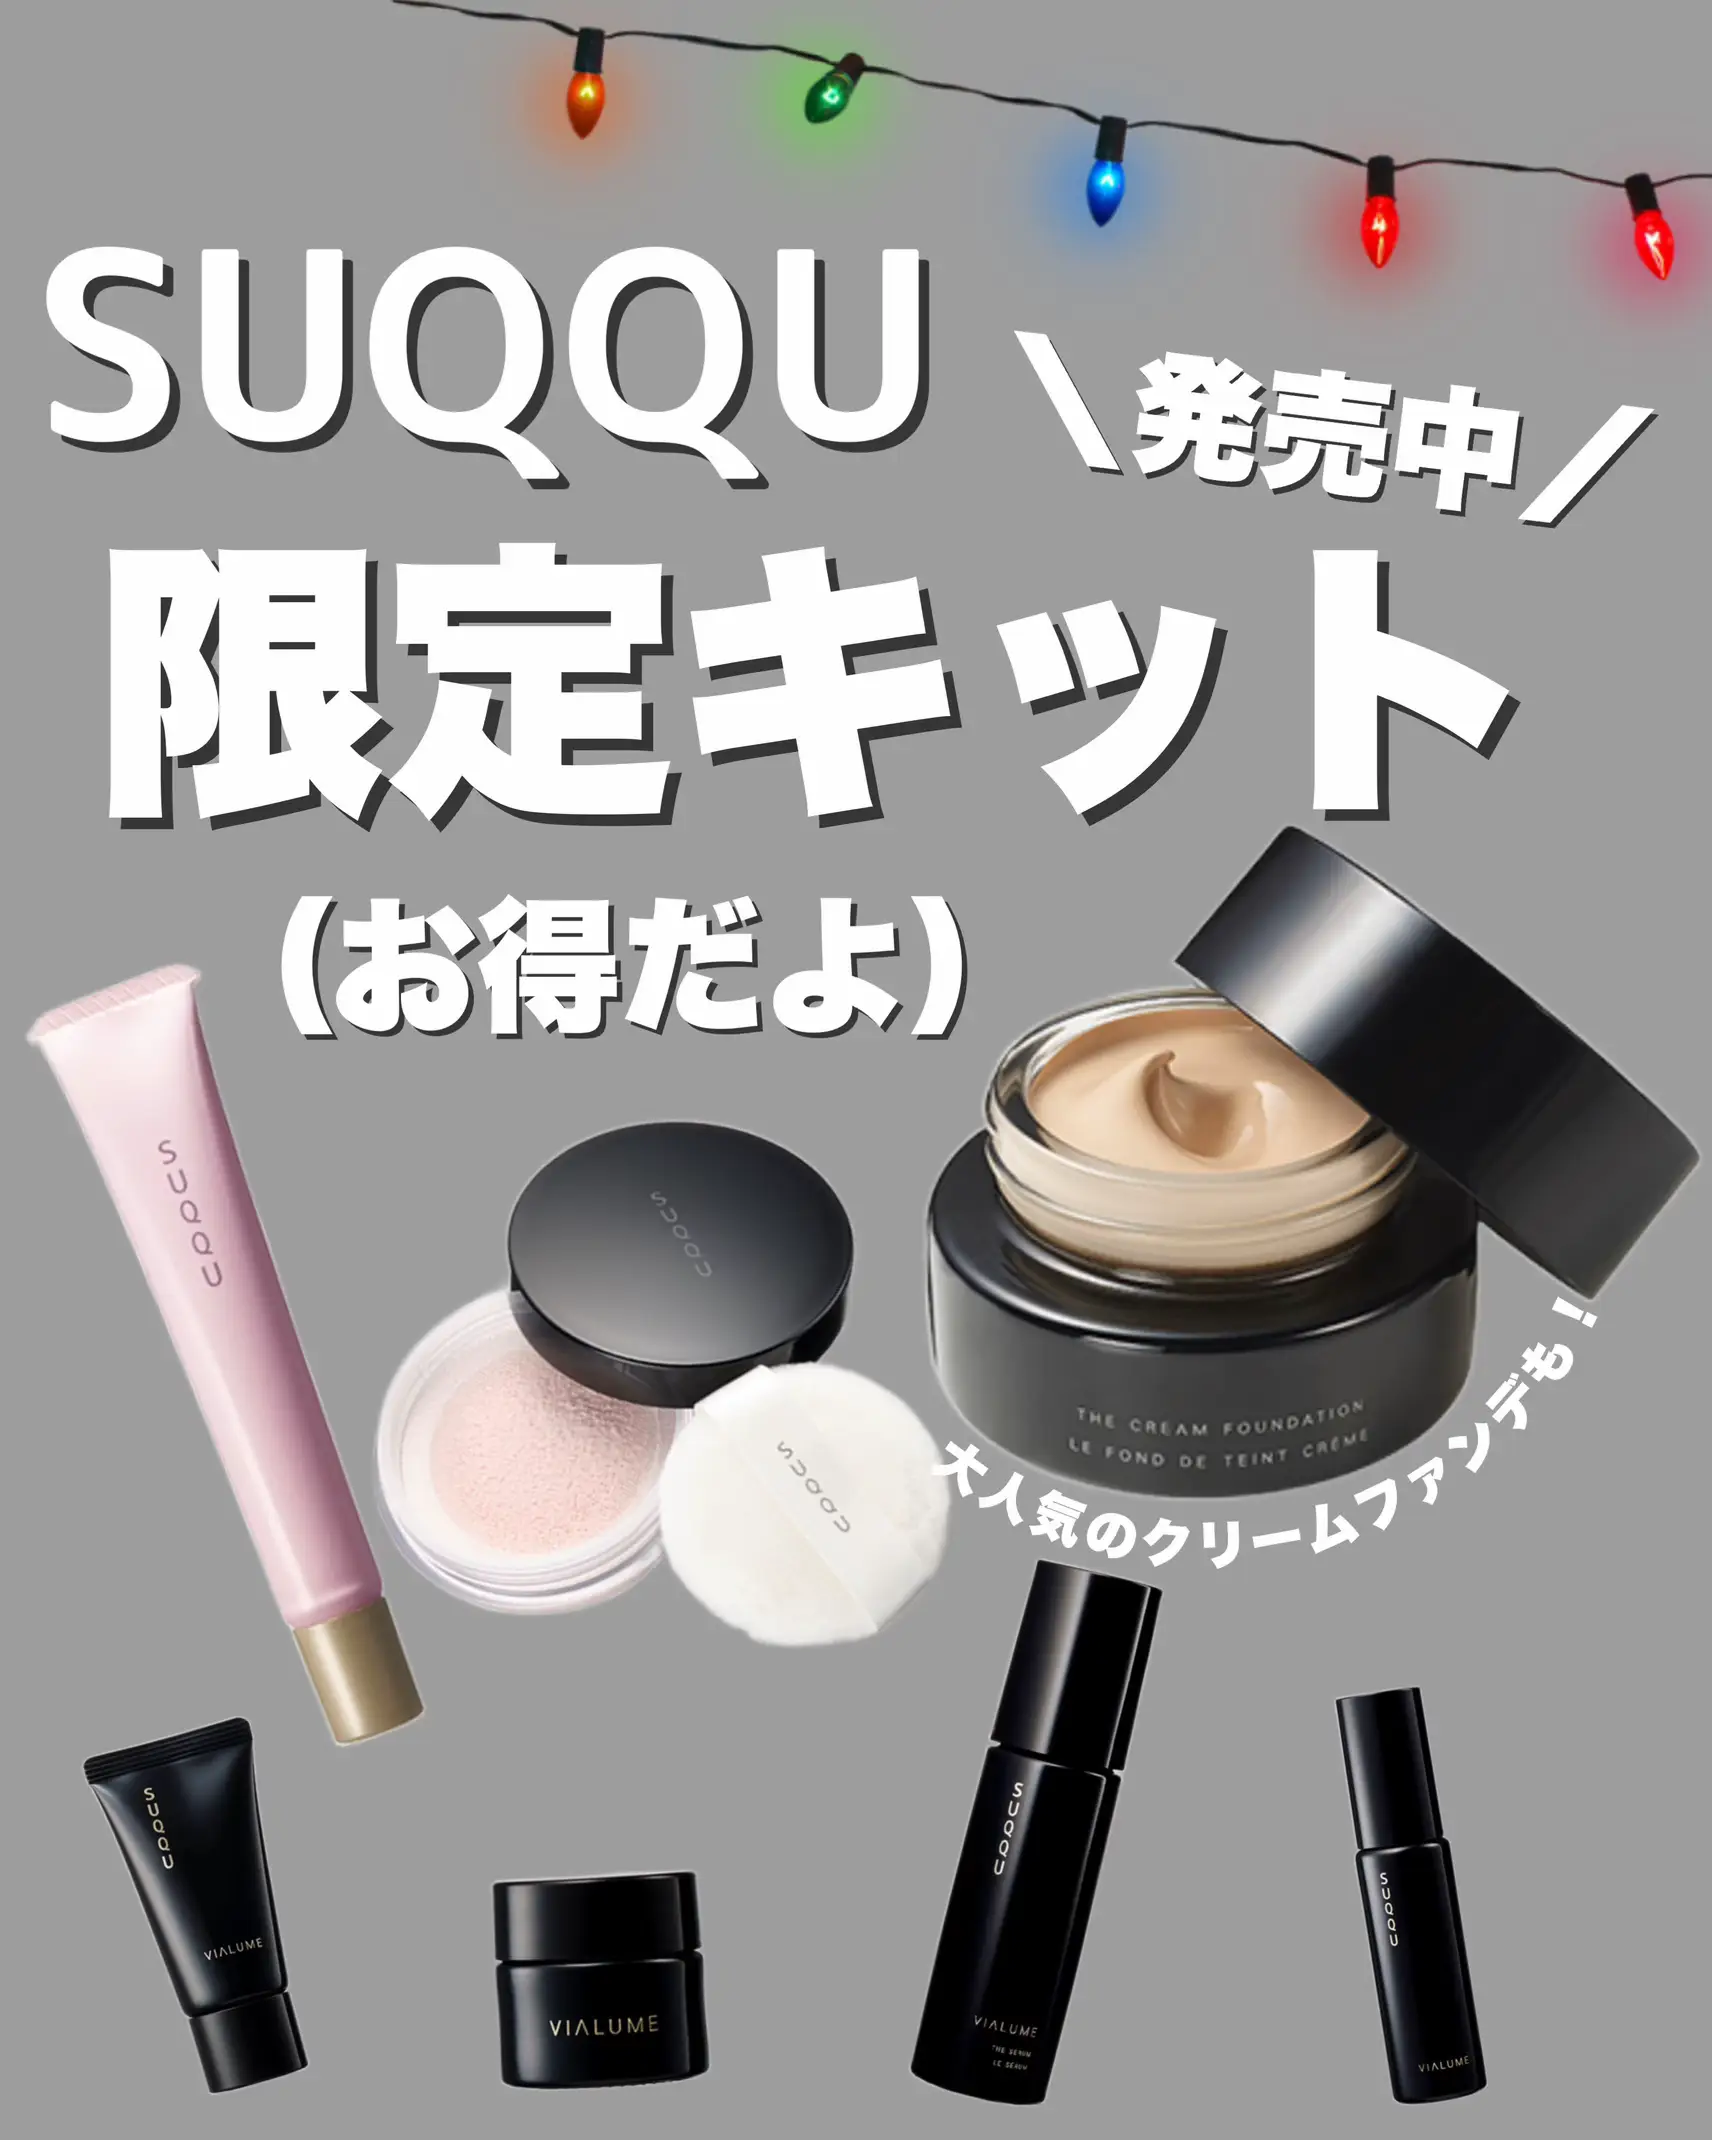 SUQQU deals kit / on sale! Popular items are packed✨ | Gallery